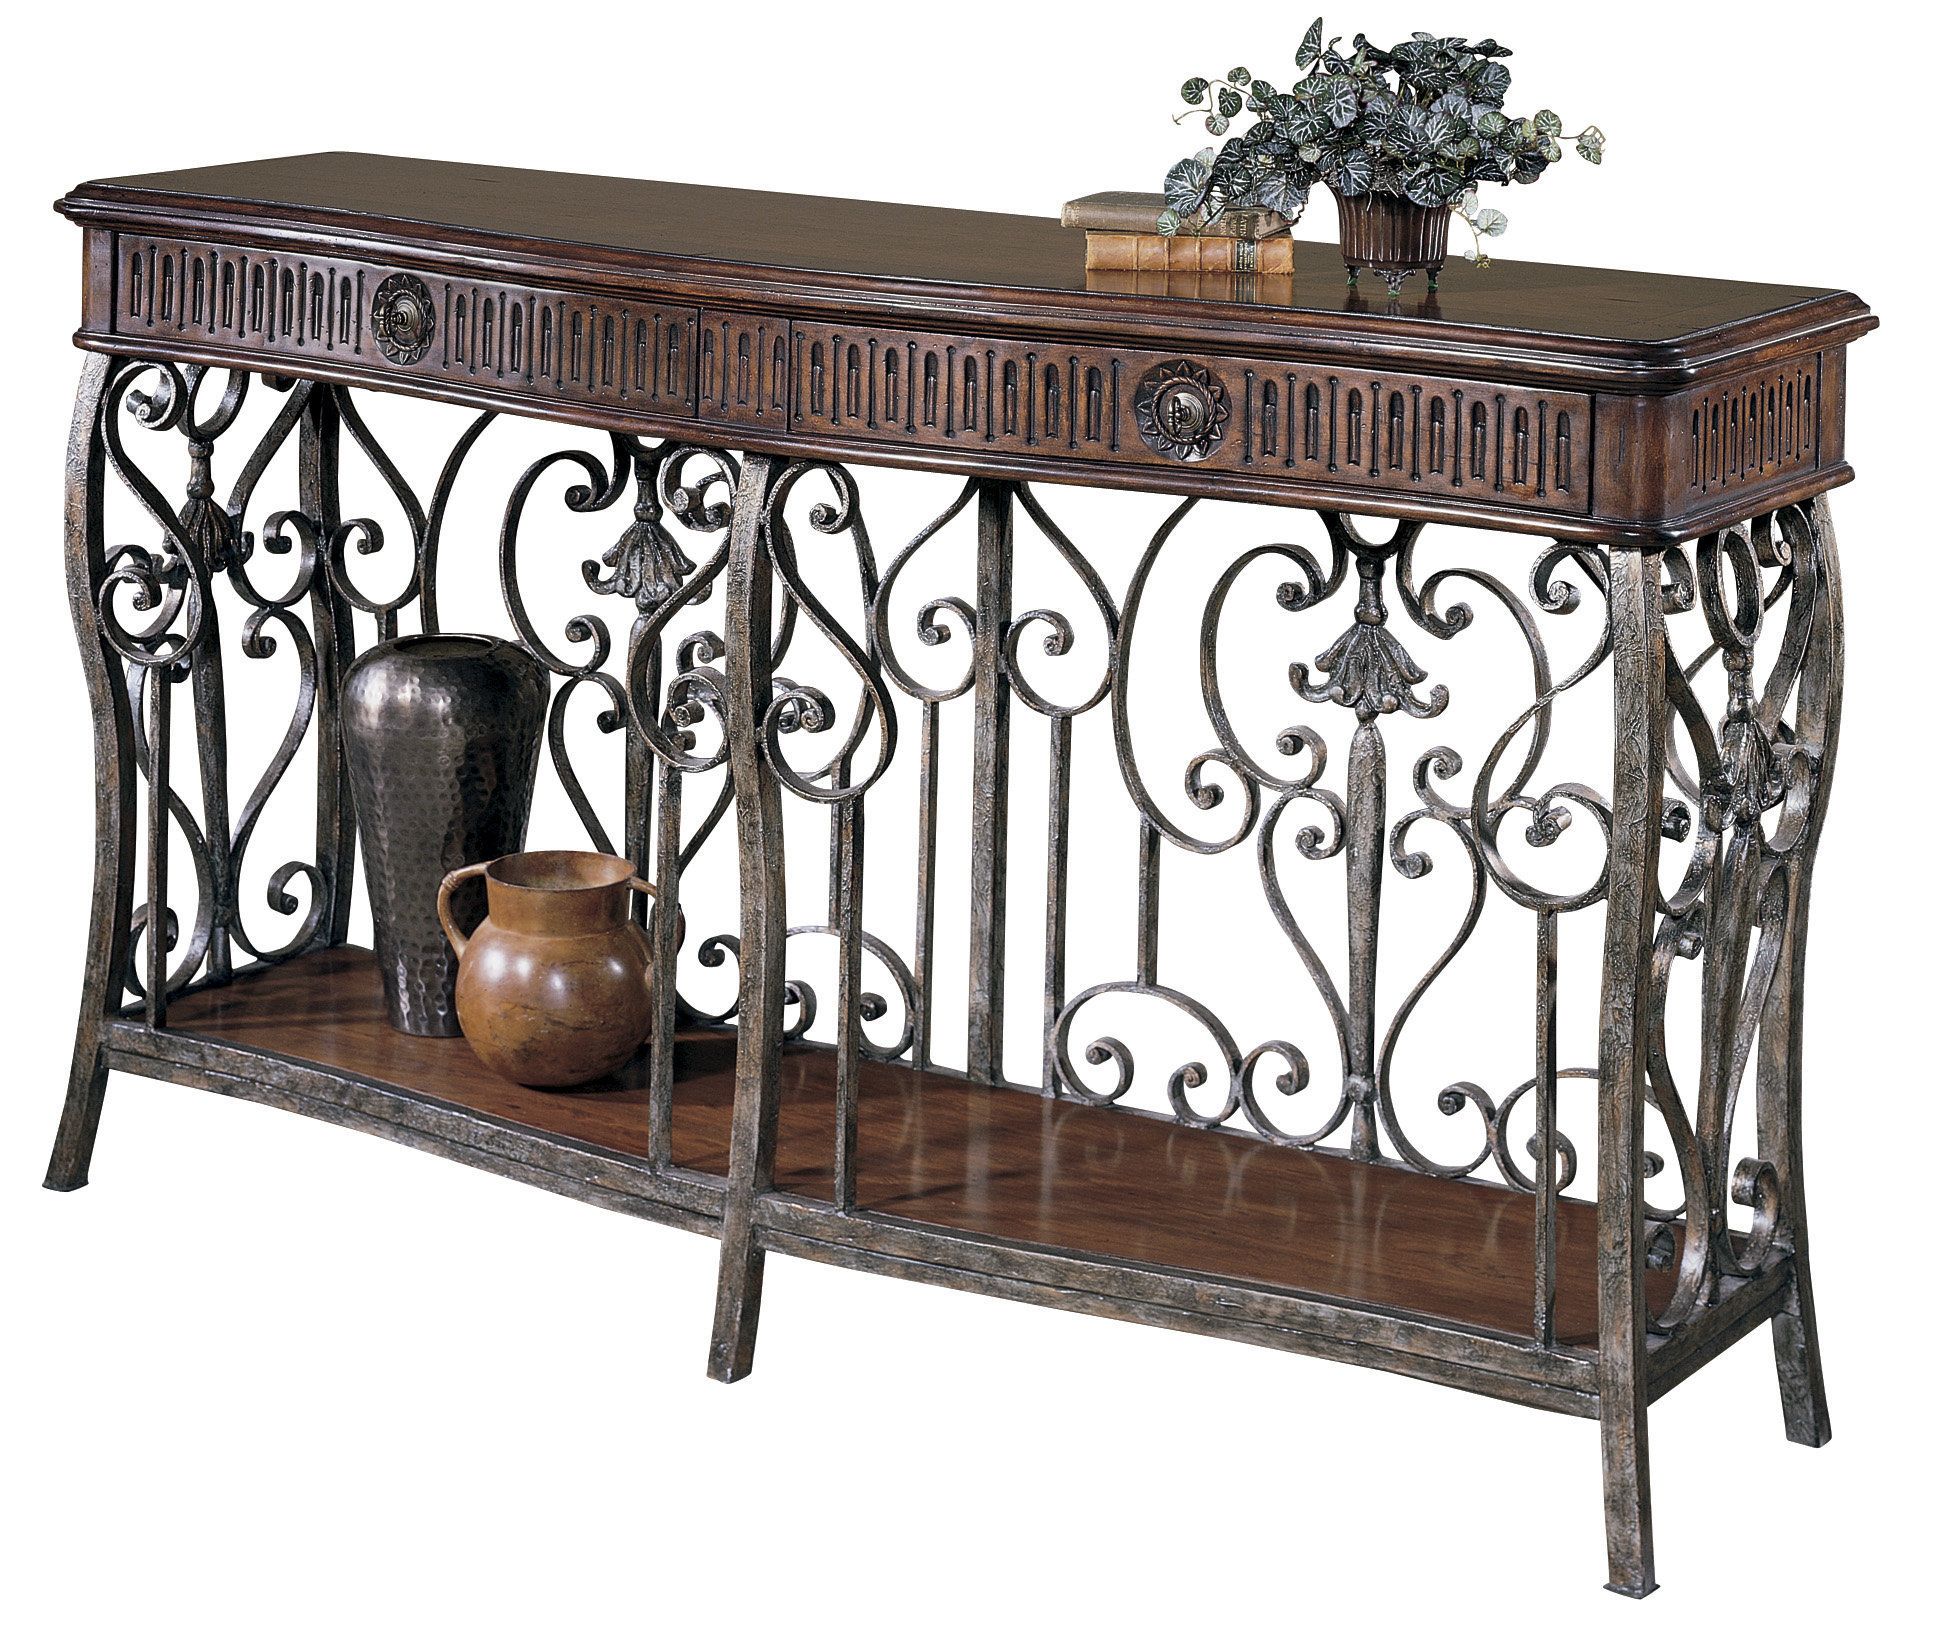 Distressed Console Table With Metal – Classic Wood Accent Furniture In Distressed Iron 4 Shelf Desks (View 9 of 15)